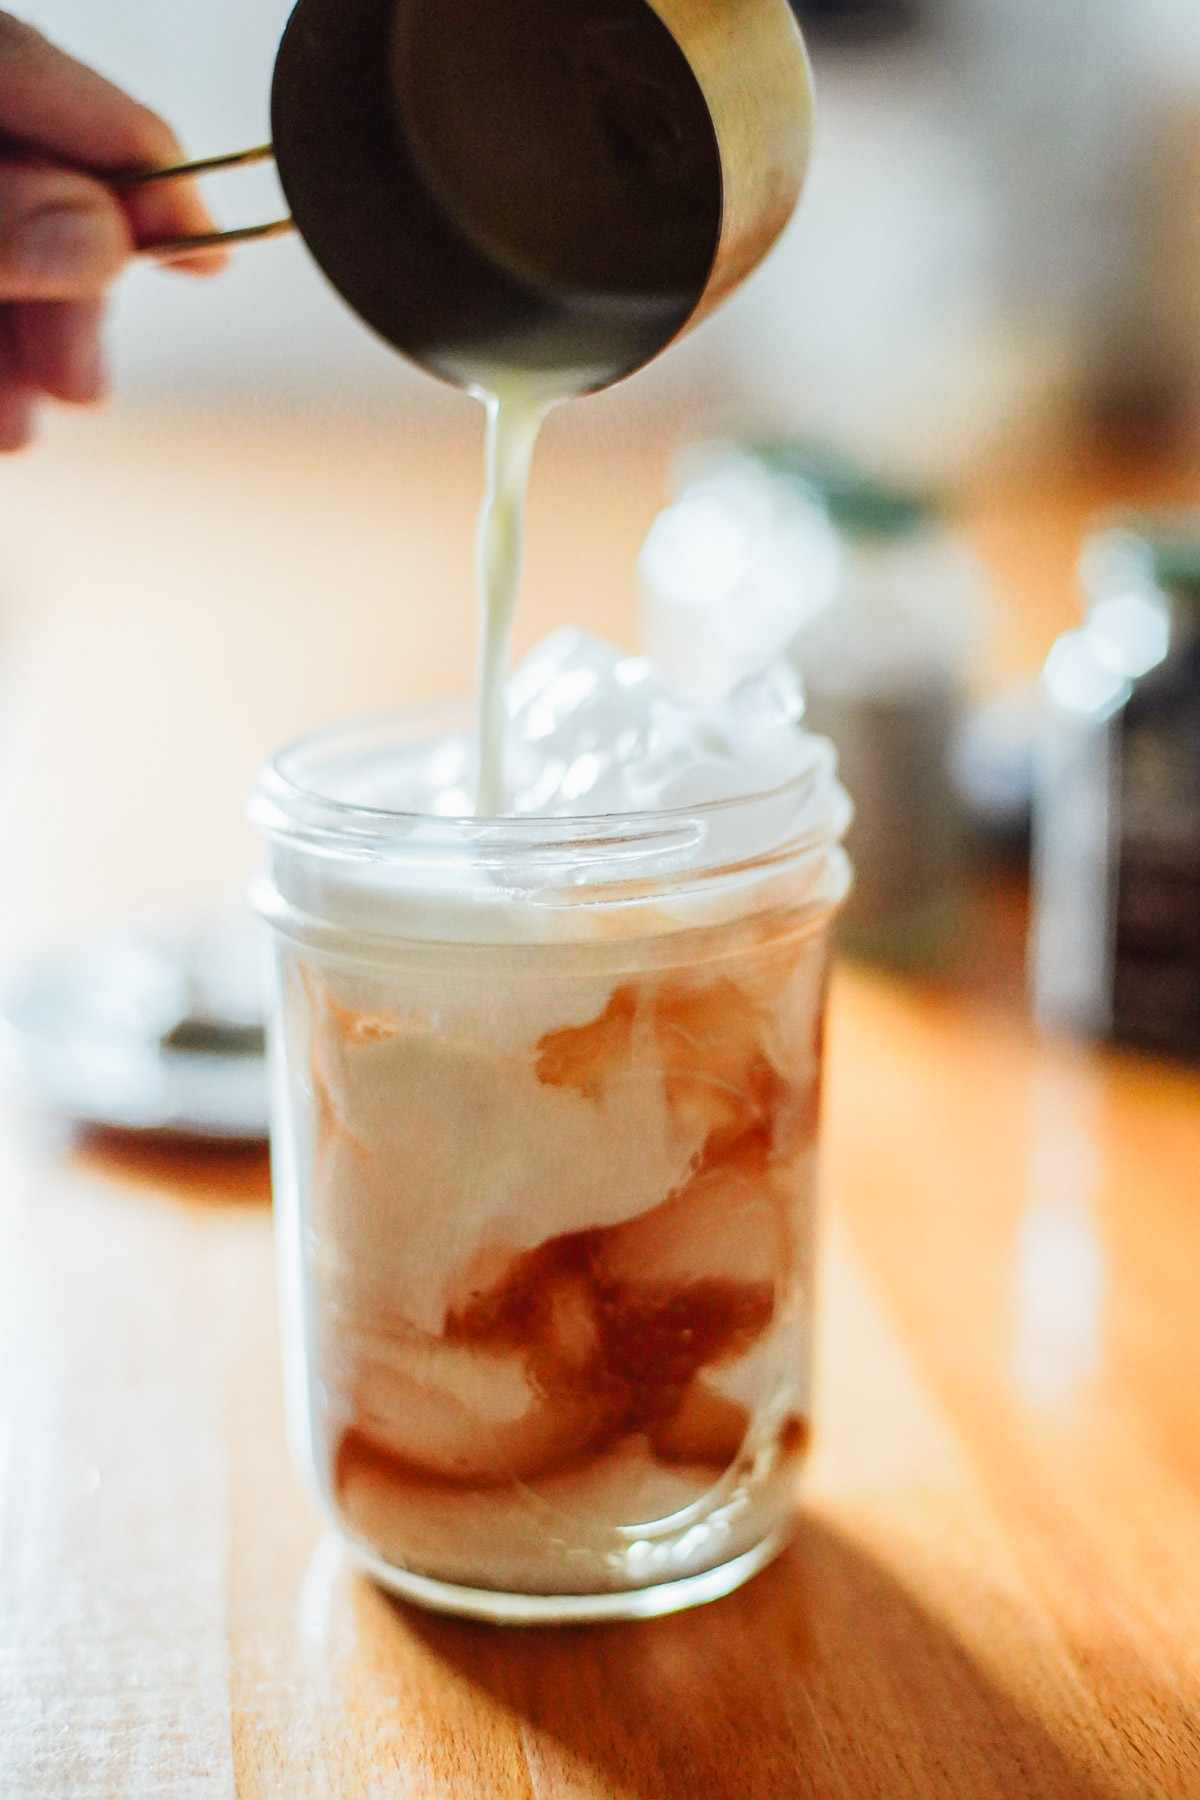 How to make Iced Chai Latte Recipe with Tea bags & Spices